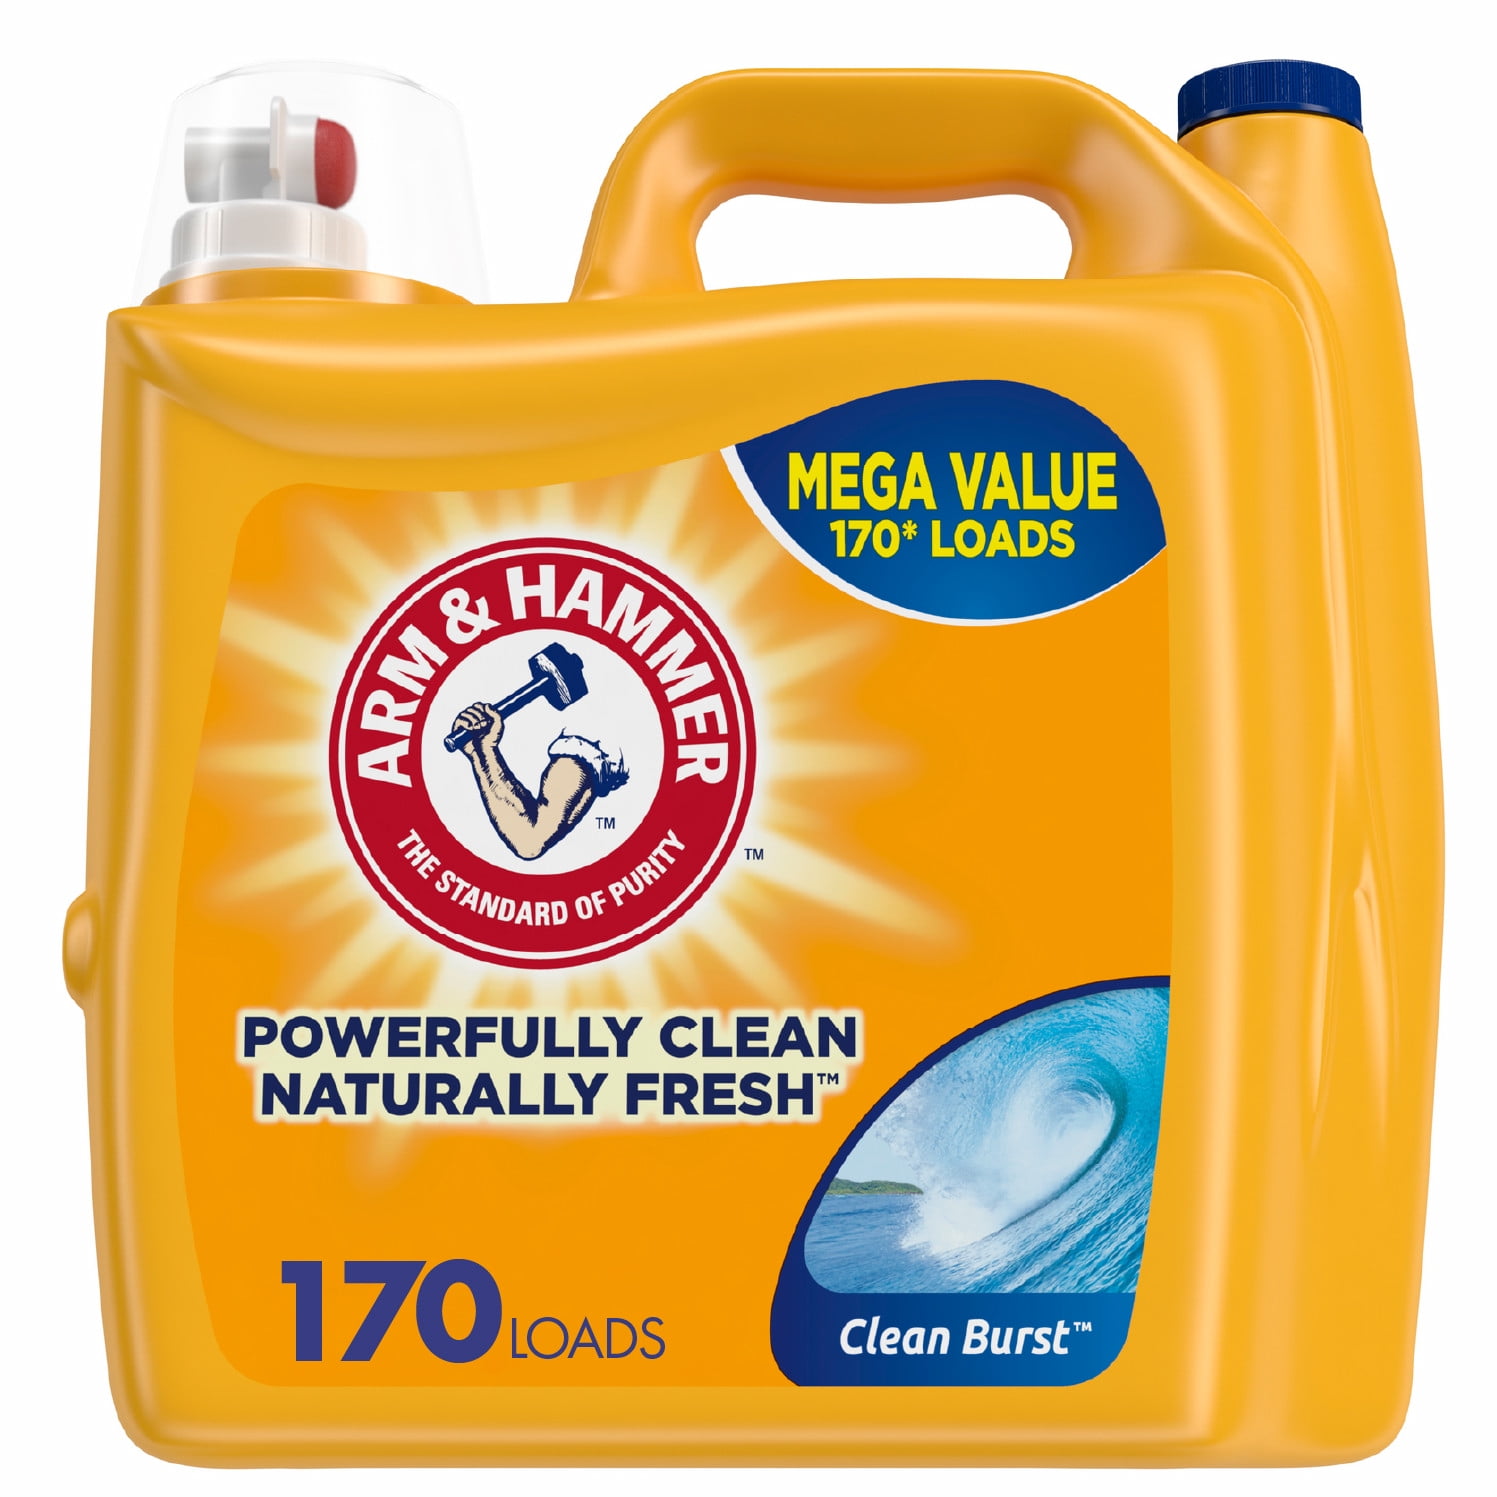 Is Arm And Hammer Laundry Detergent Toxic